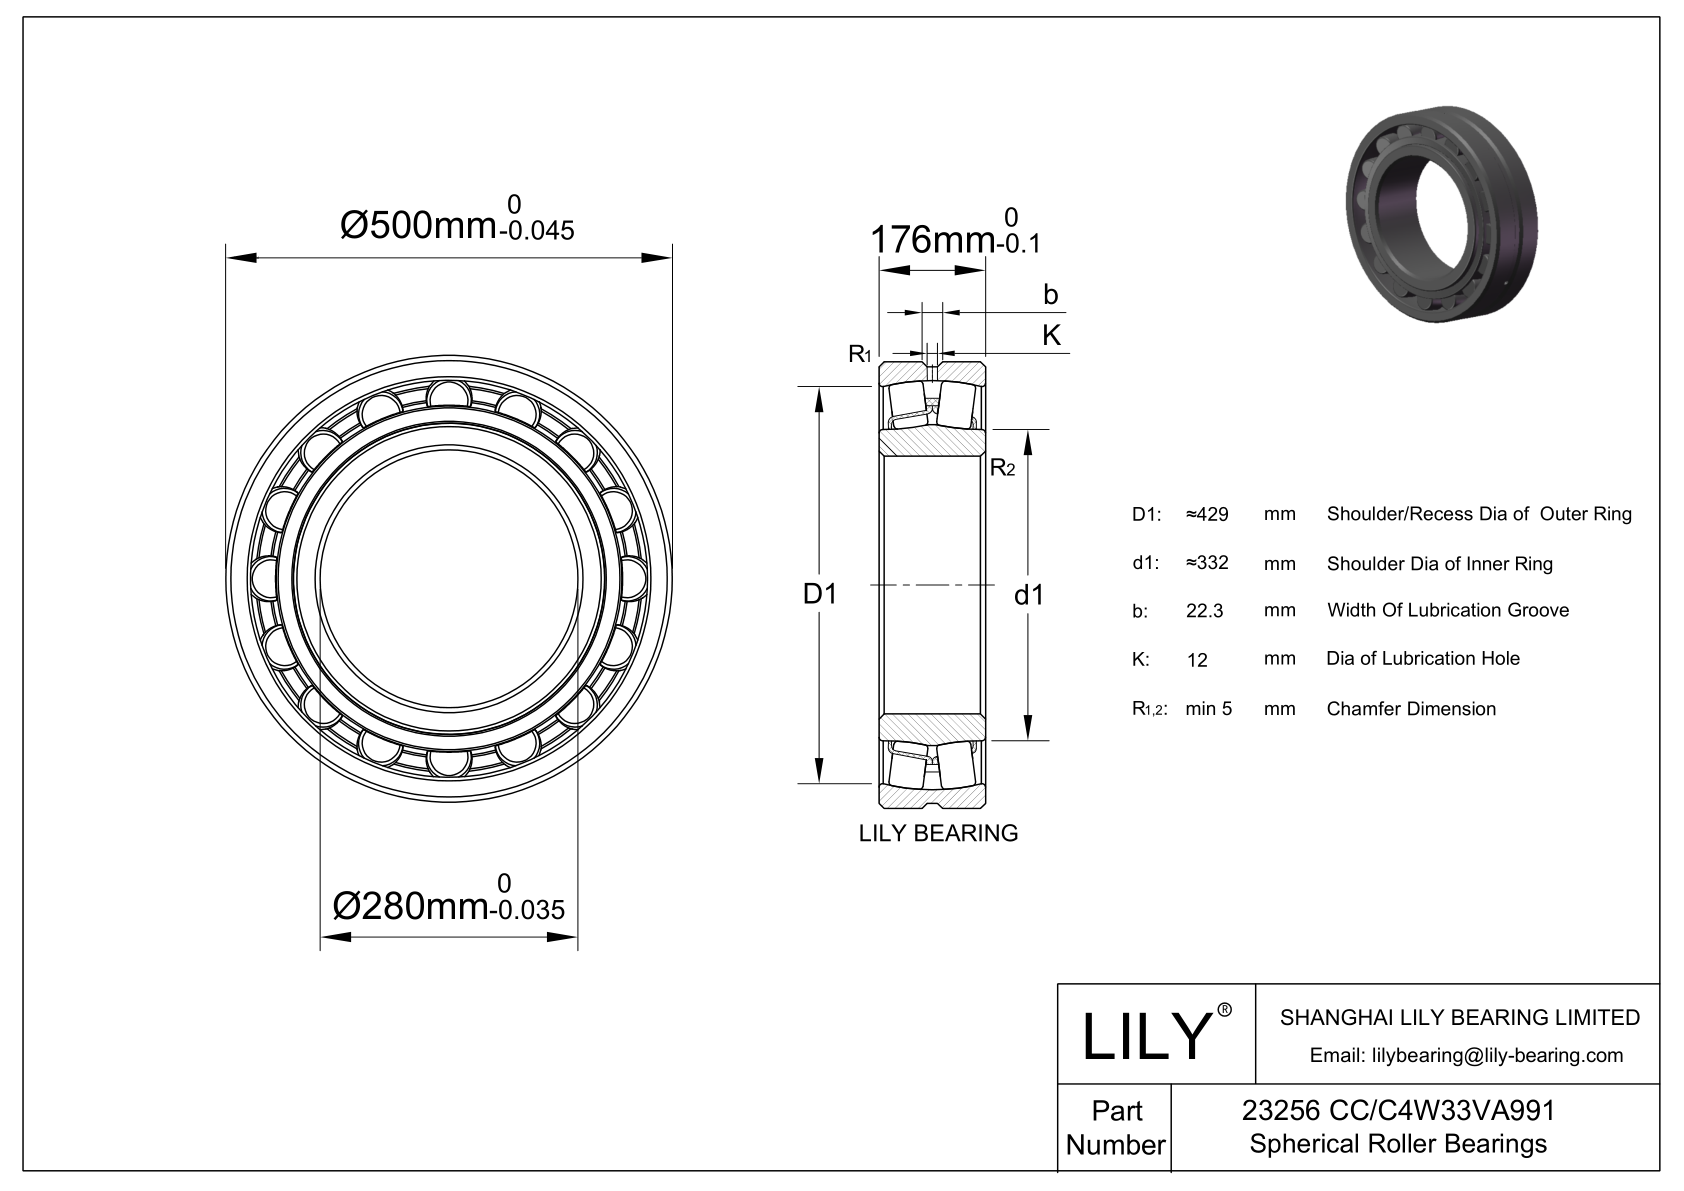 23256 CC/C4W33VA991 Double Row Spherical Roller Bearing cad drawing